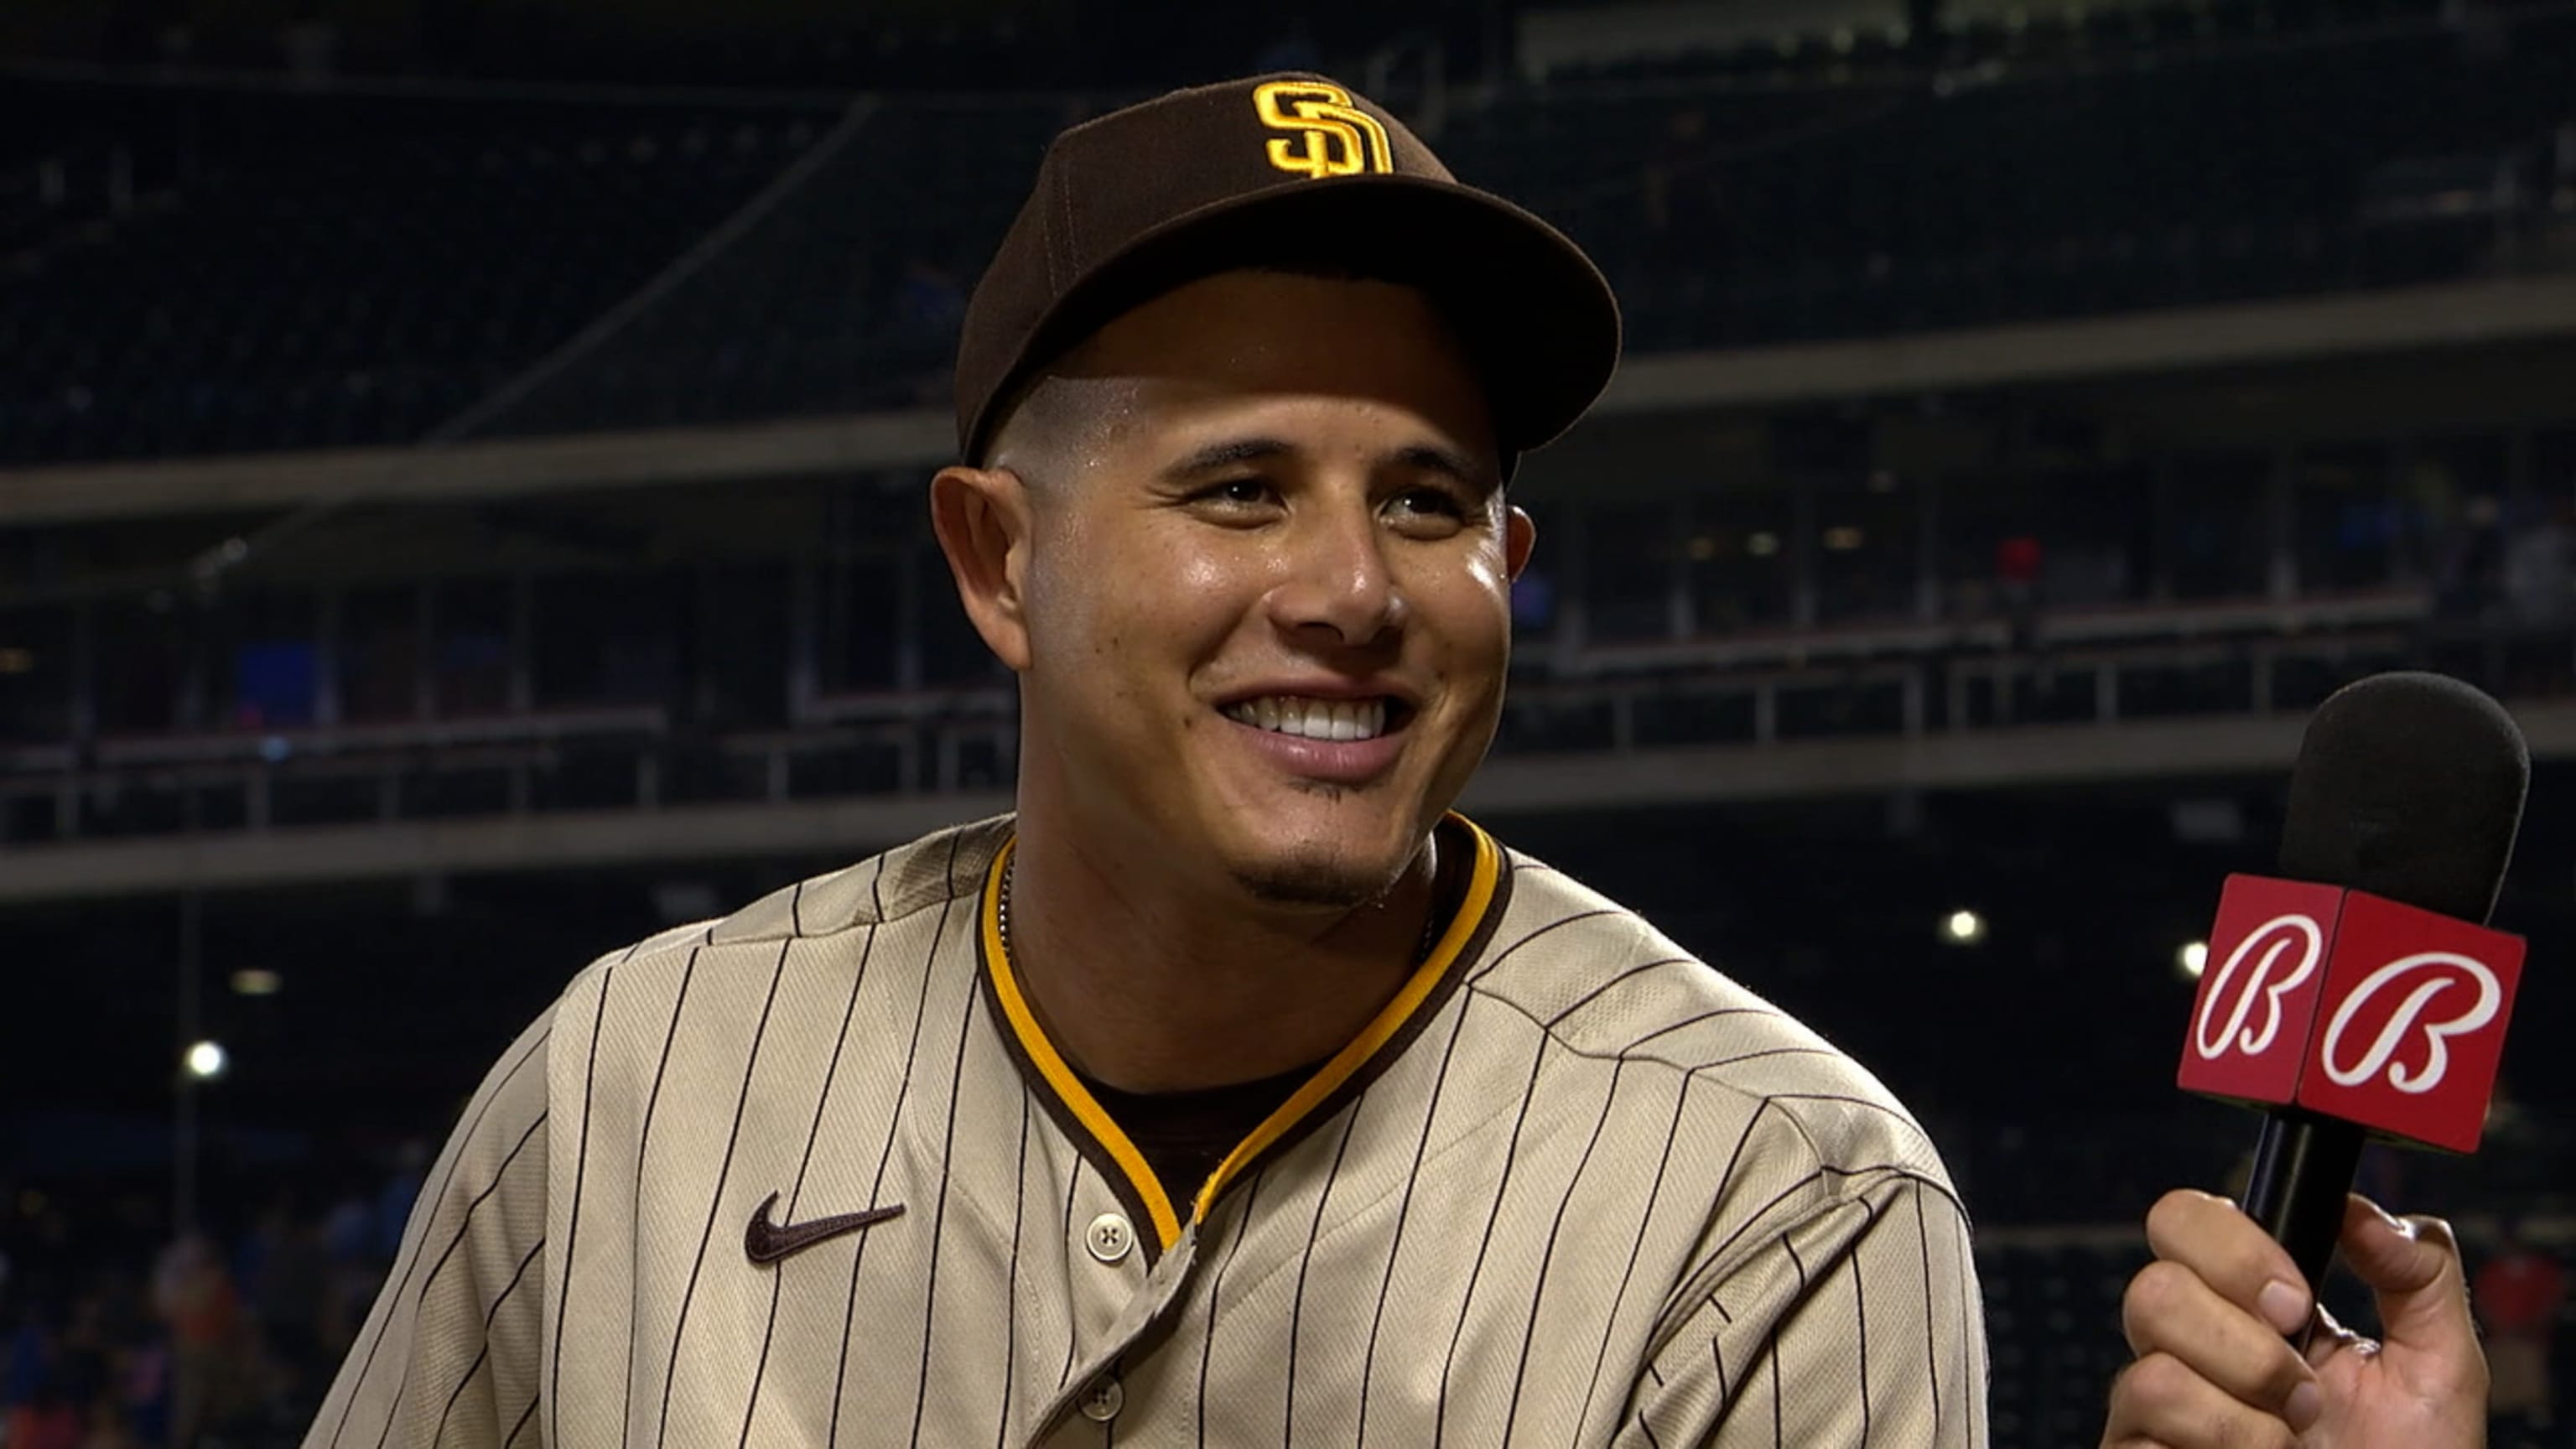 Manny Machado's key hit lifts Padres over Mets